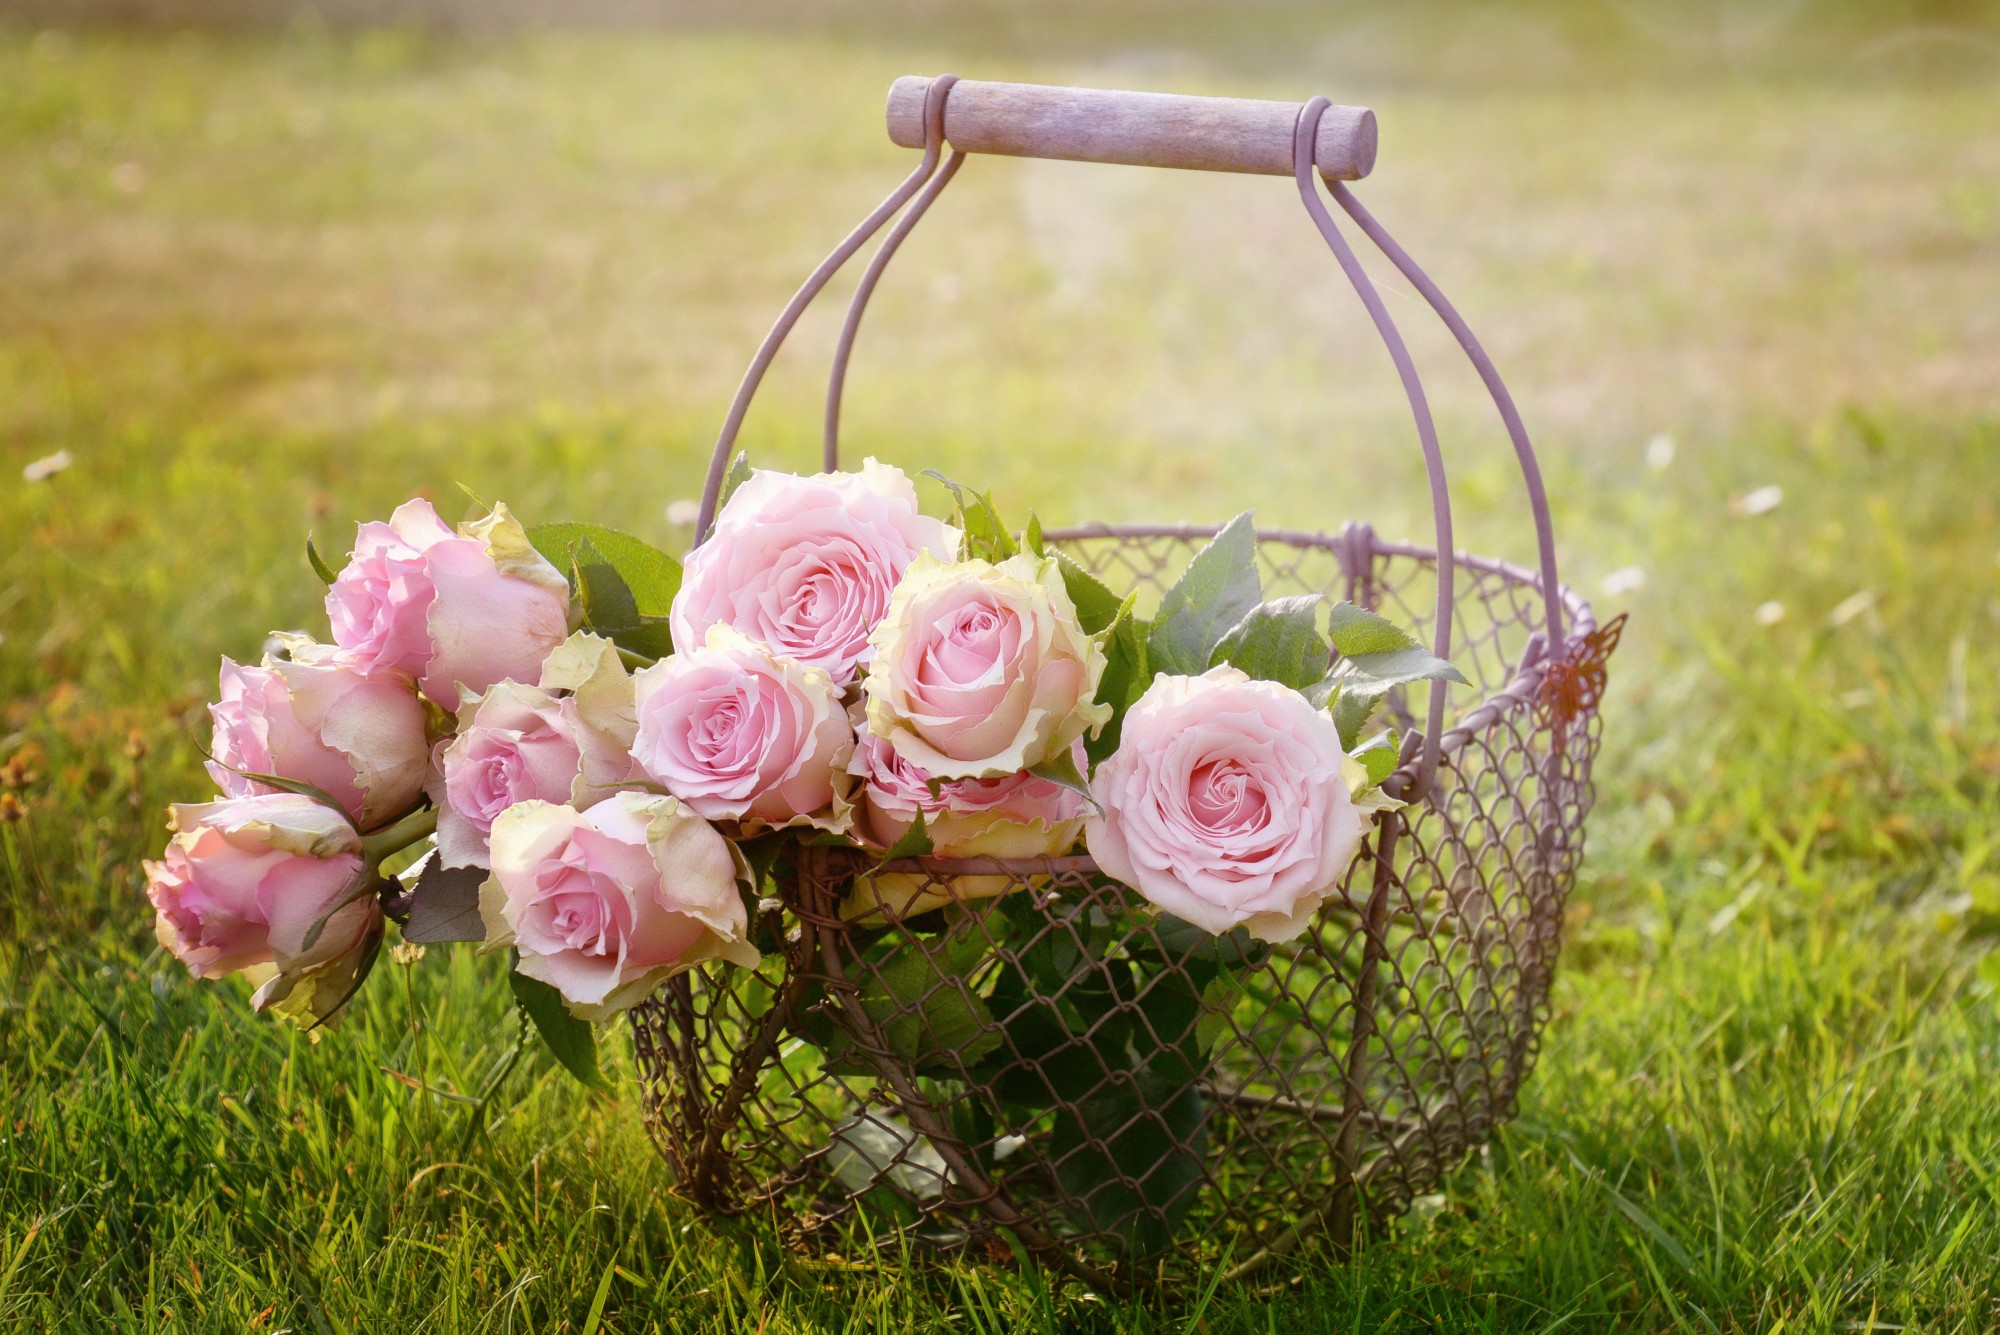 5 Occasions Where It's Appropriate to Give Pink Roses